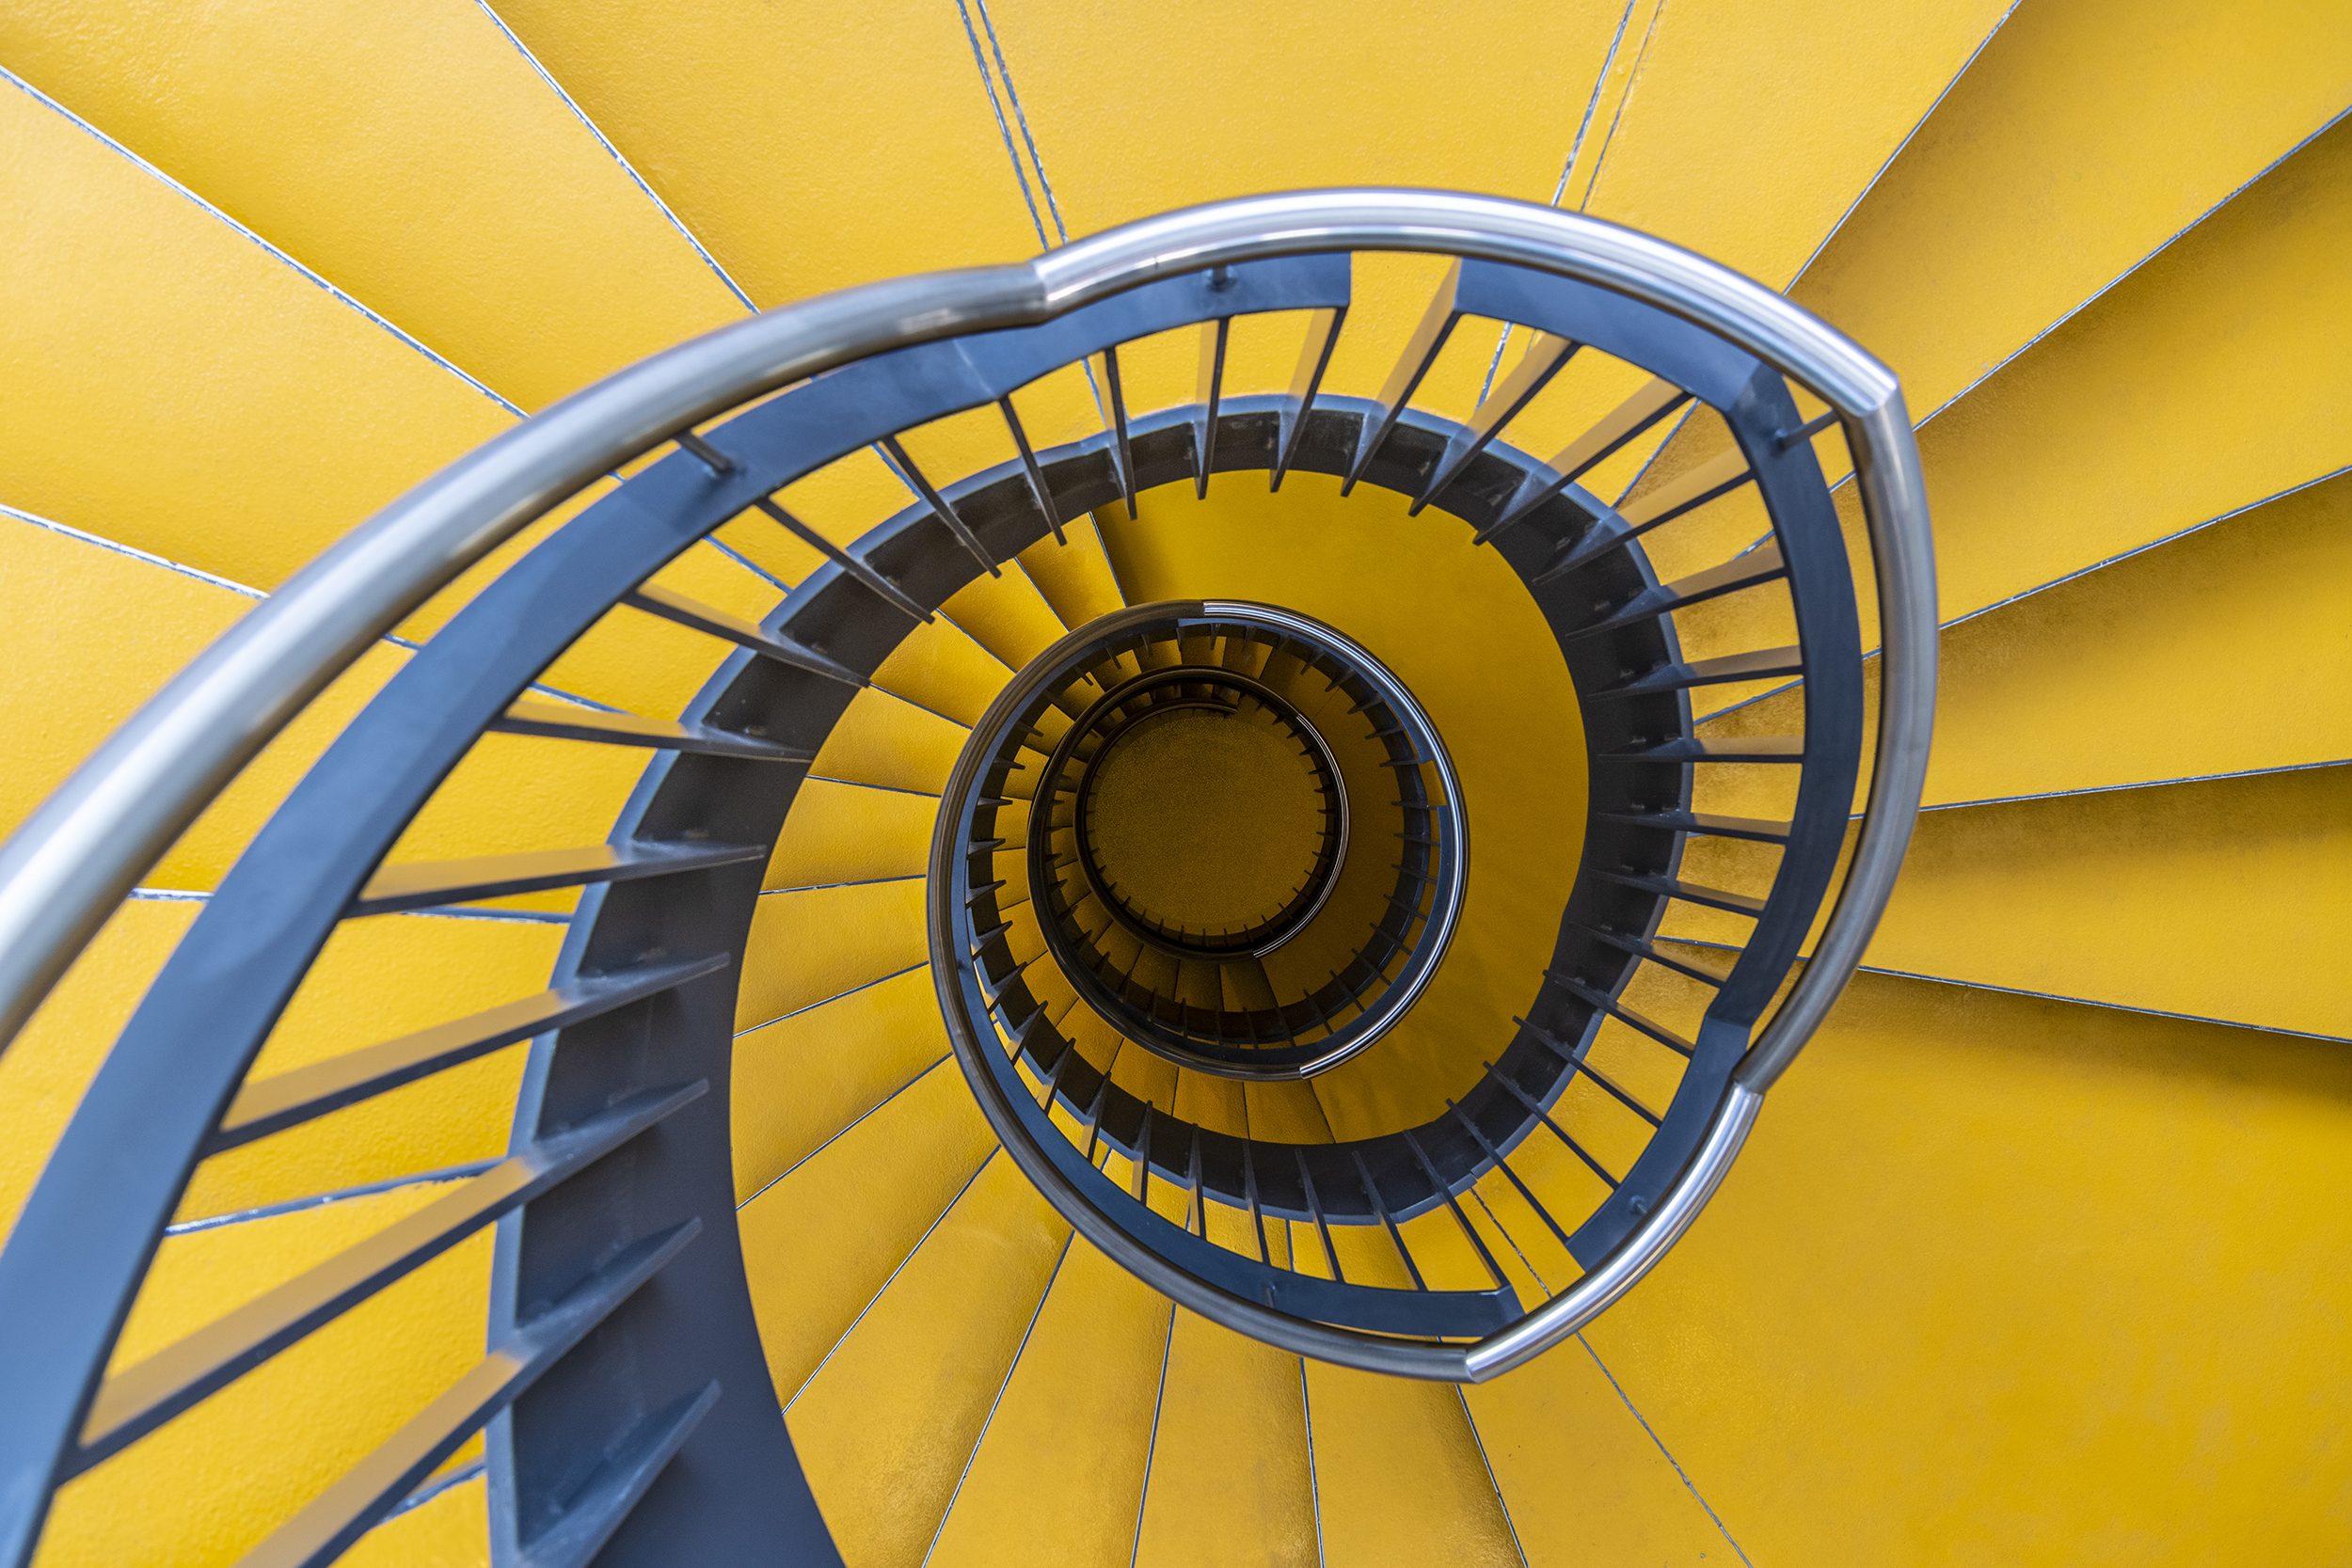 Spiral staircase, shot from above (Utrecht, The Netherlands)